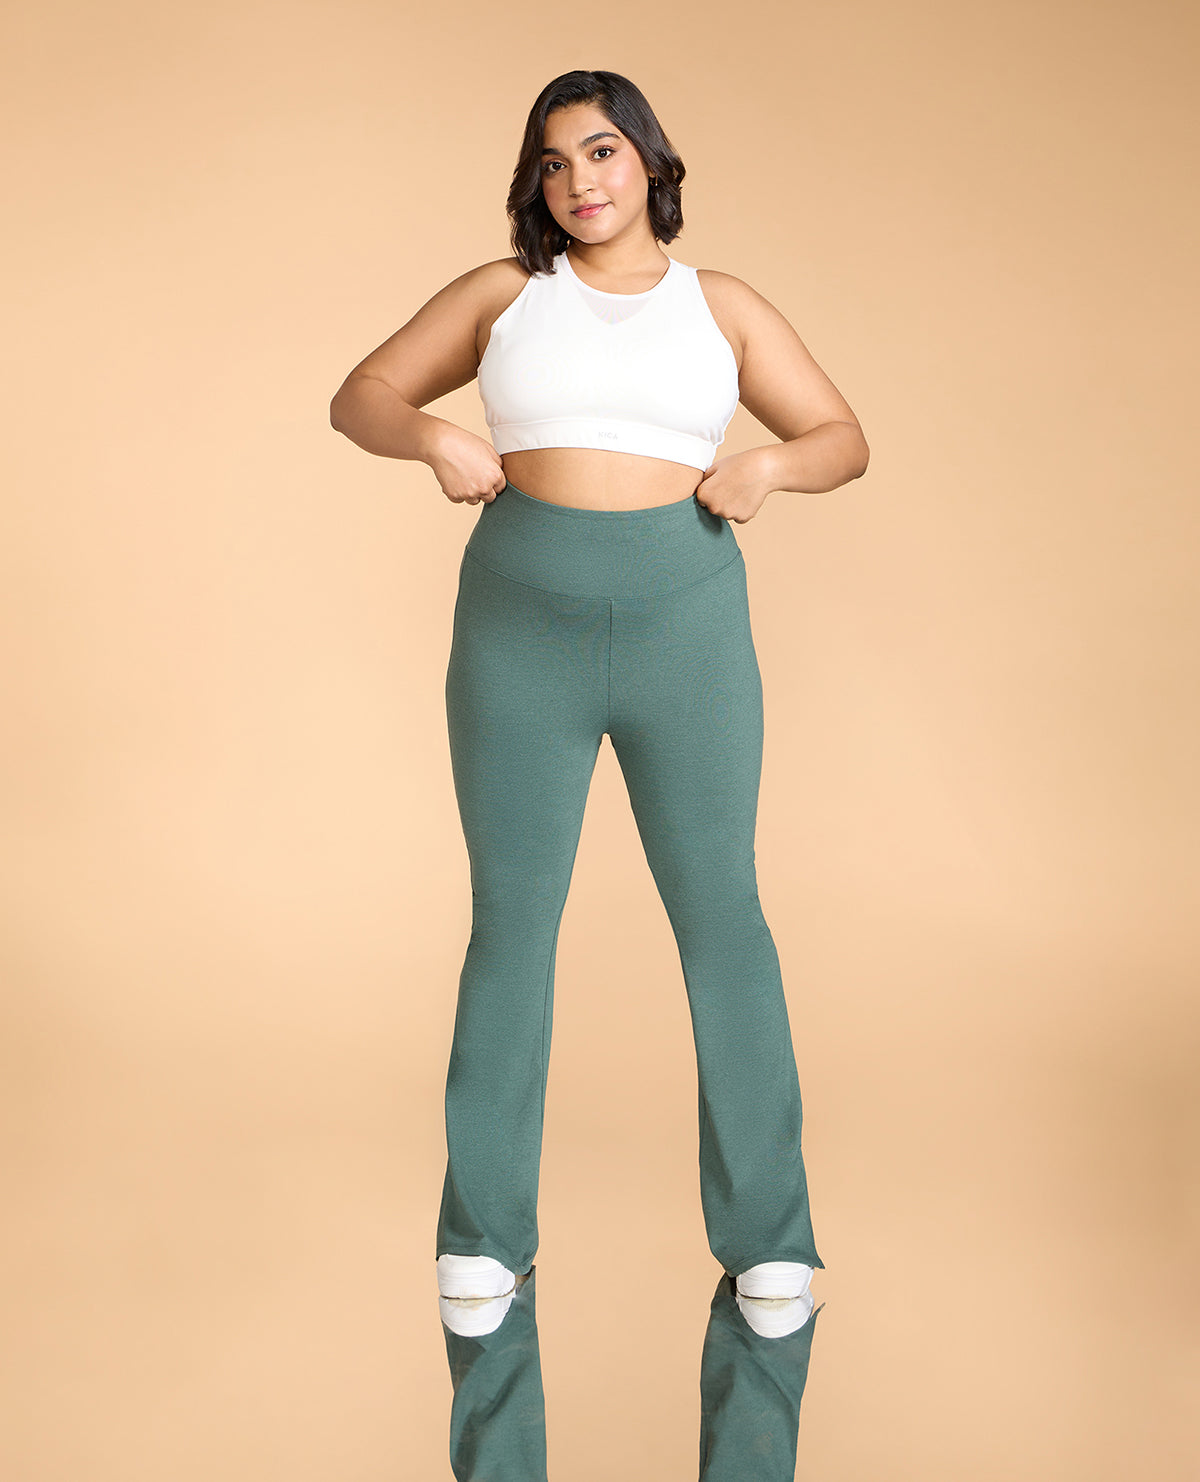  GATXVG Flowy Layered Active Pant for Women Elastic